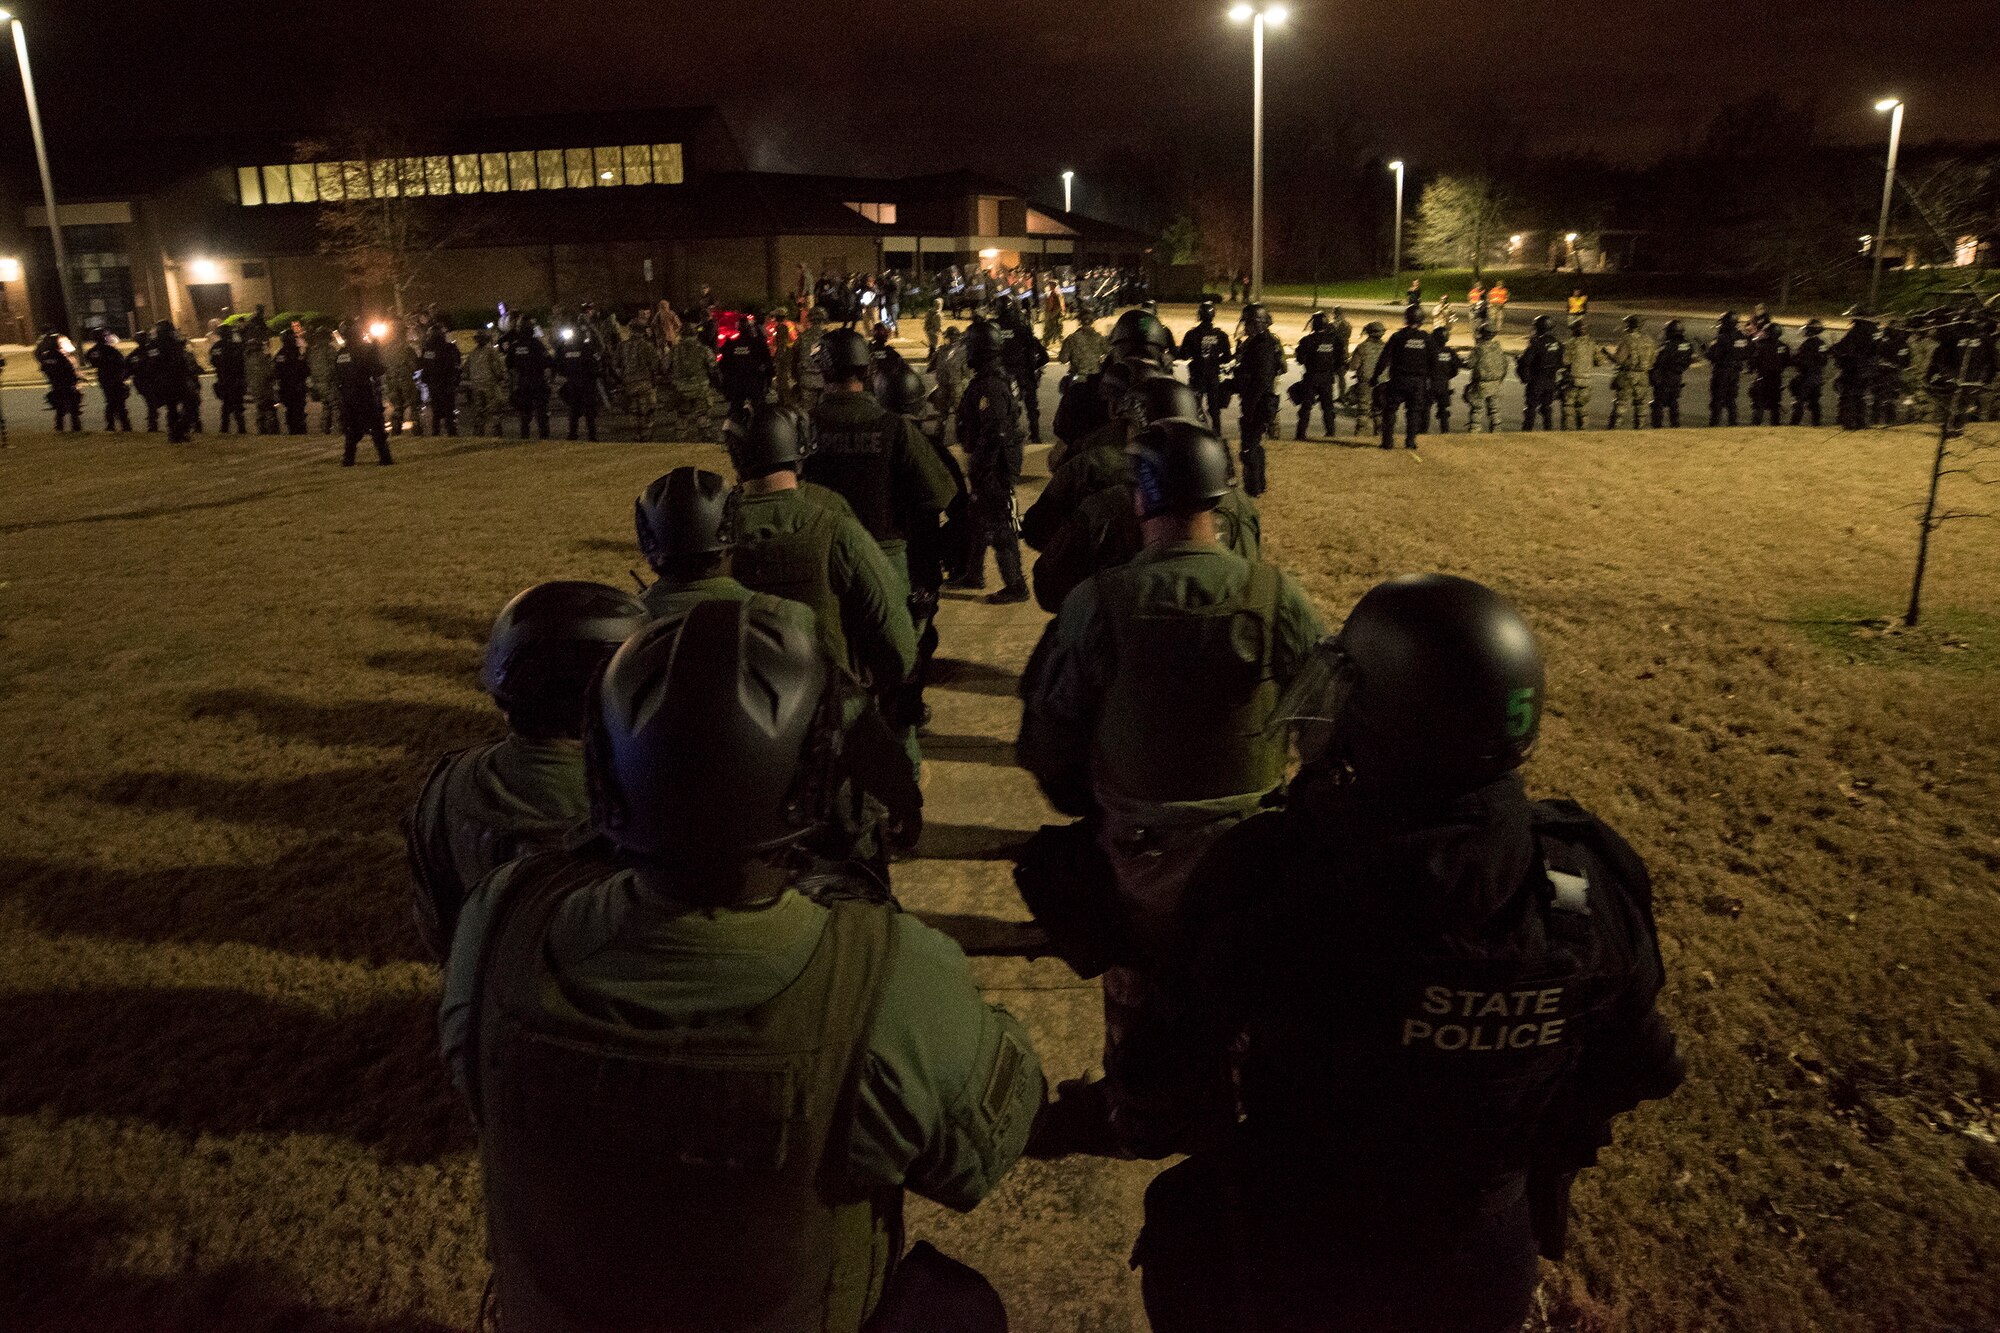 Arkansas National Guard and Arkansas State Police members form a crowd control line during Operation Phalanx, March 30-31, 2019, at Little Rock Air Force Base, Arkansas. The operation is a joint exercise hosted by the Arkansas National Guard for civilian and military organizations to train their members in tactics and techniques used in responding to a civil disturbance. (U.S. Air National Guard photo by Staff Sgt. Matthew Matlock)